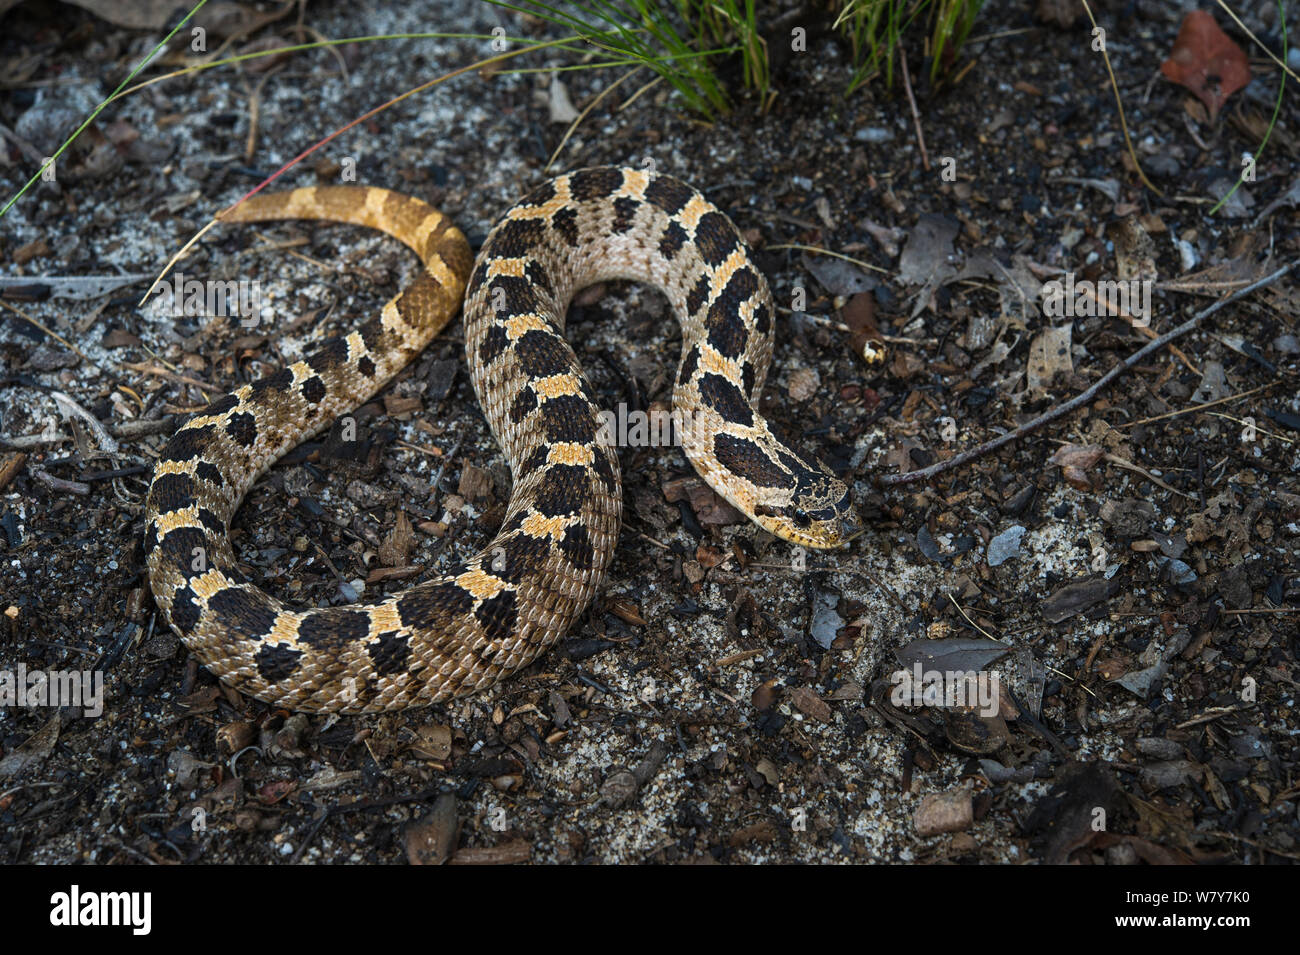 Southern Hognose Snake Heterodon Simus Captive Endemic To The Southeastern United States Vulnerable Species Stock Photo Alamy